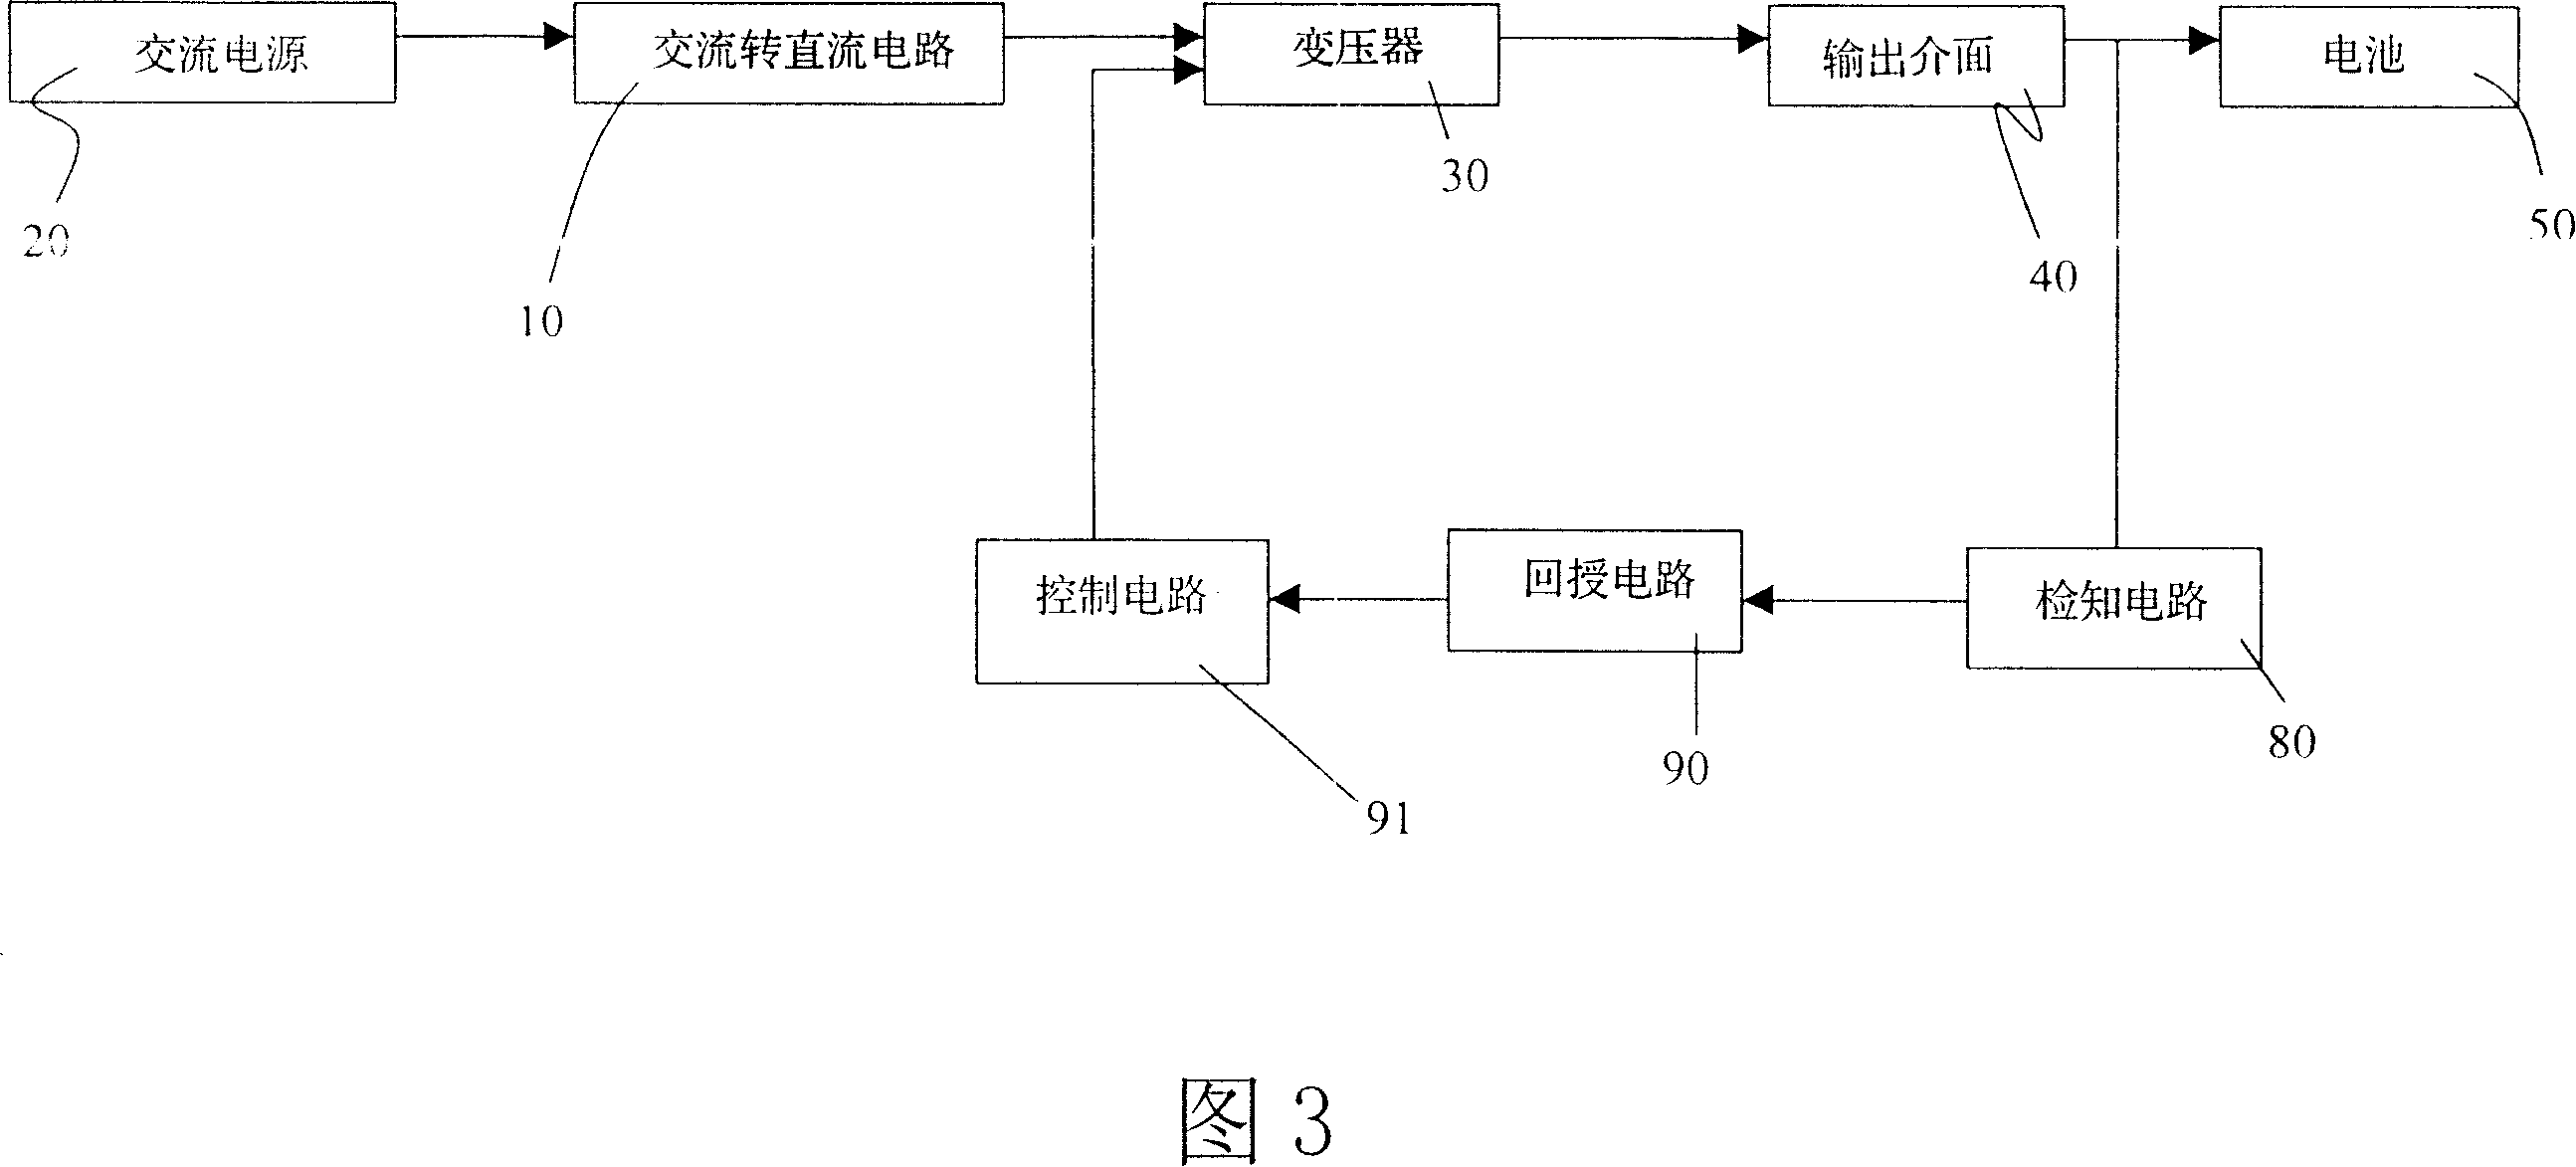 Charger circuit with output voltage compensation